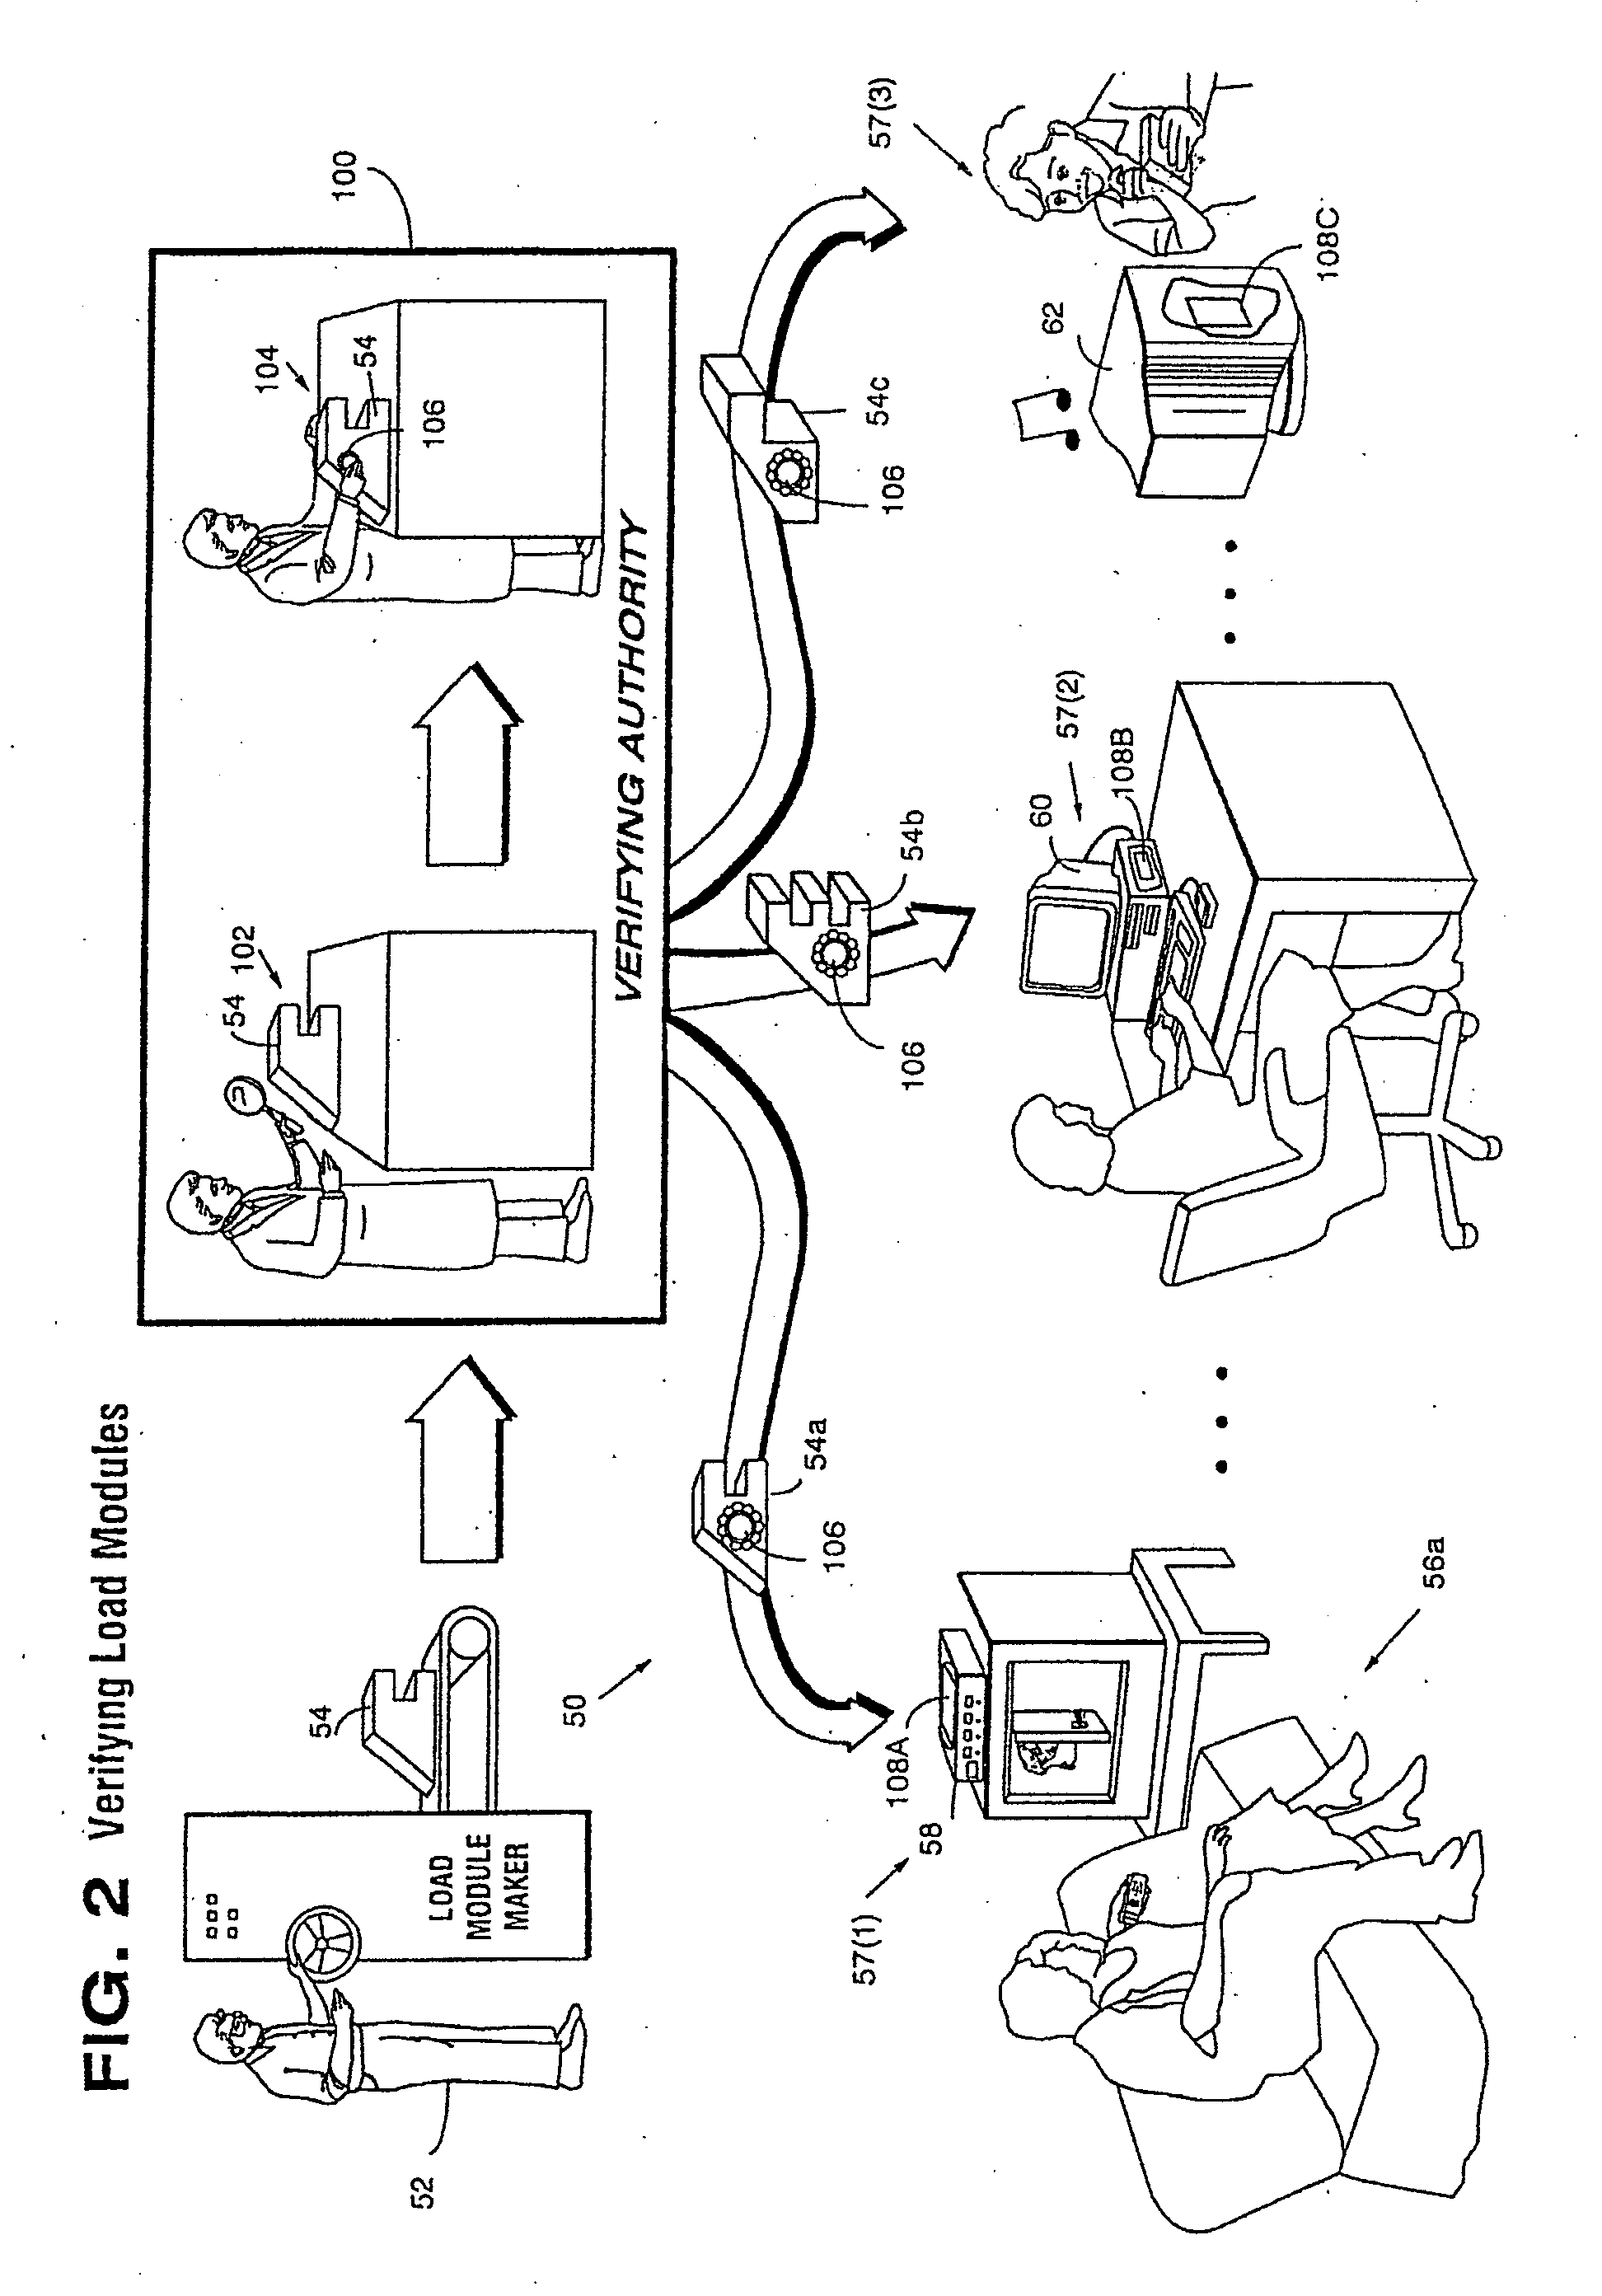 Systems and methods for using cryptography to protect secure and insecure computing environments